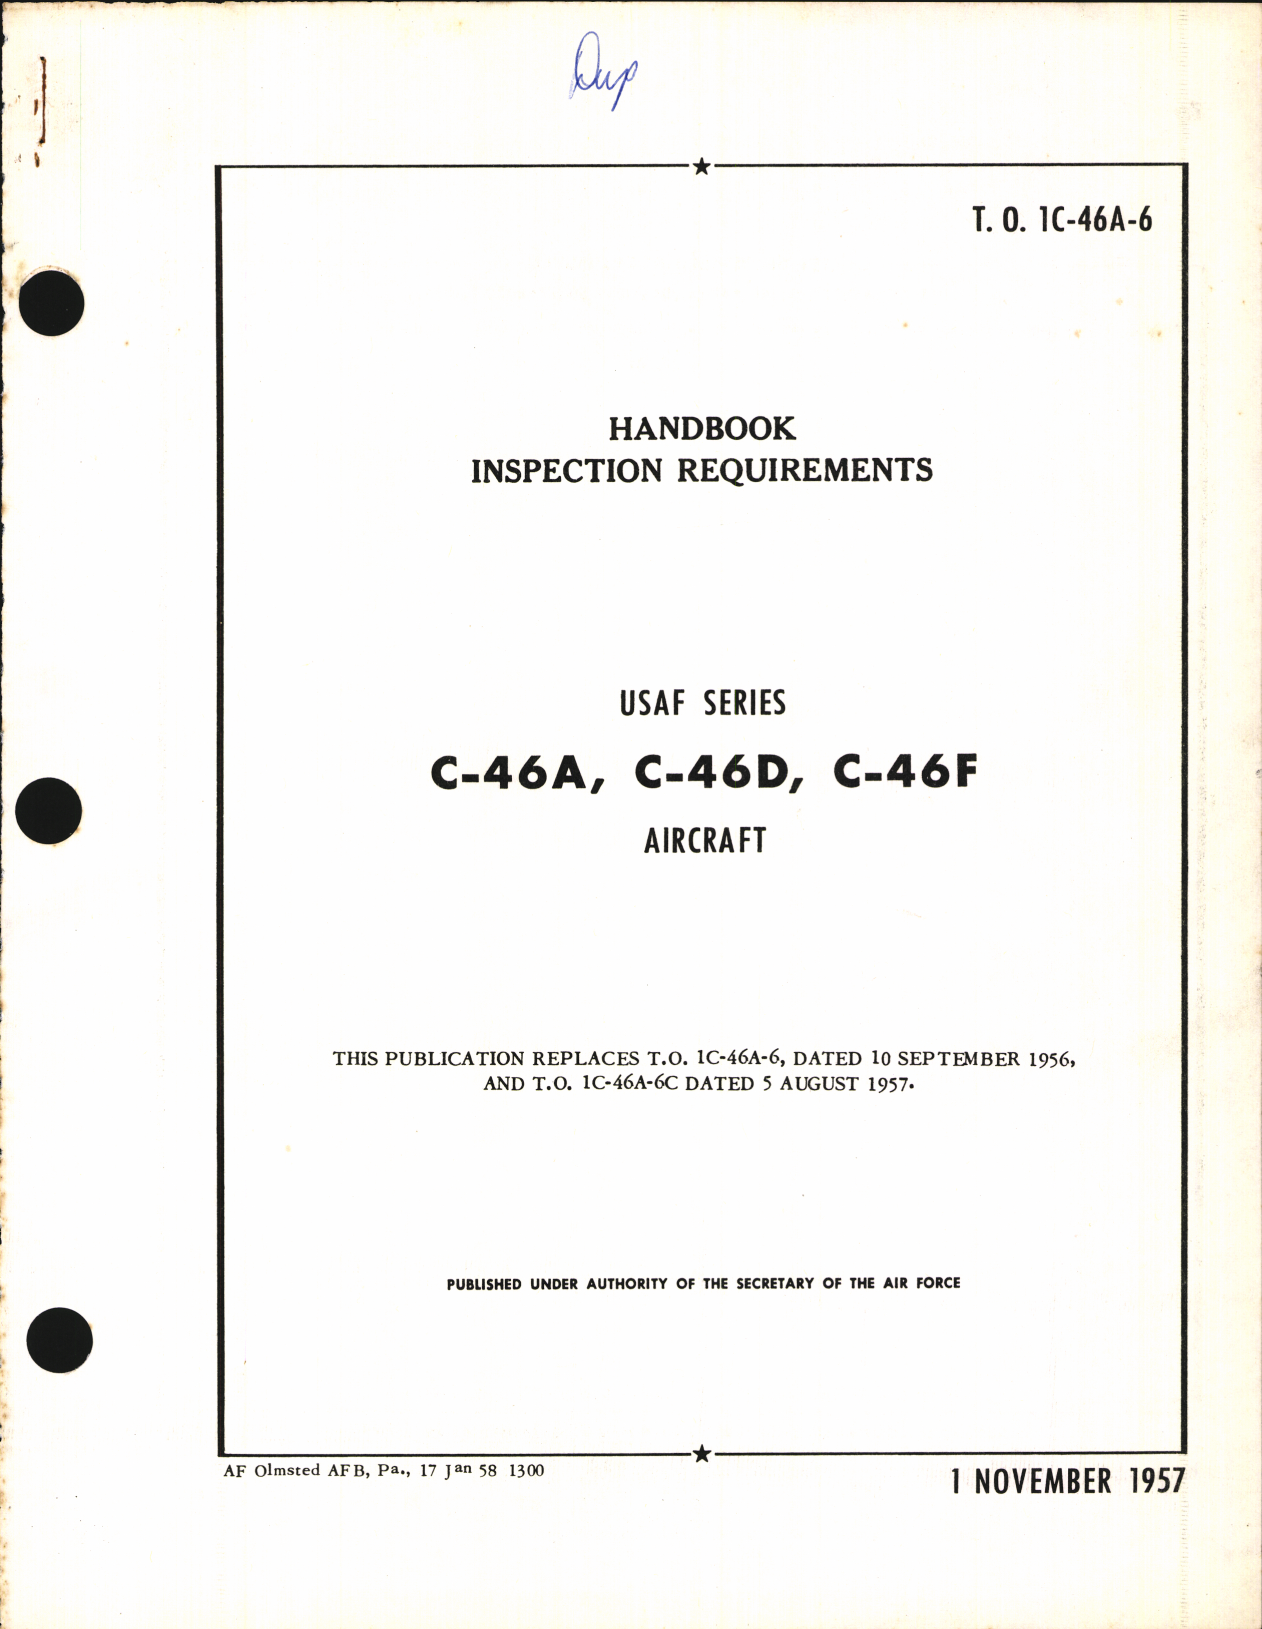 Sample page 1 from AirCorps Library document: Inspection Requirements for C-46A, C-46D, and C-46F Aircraft